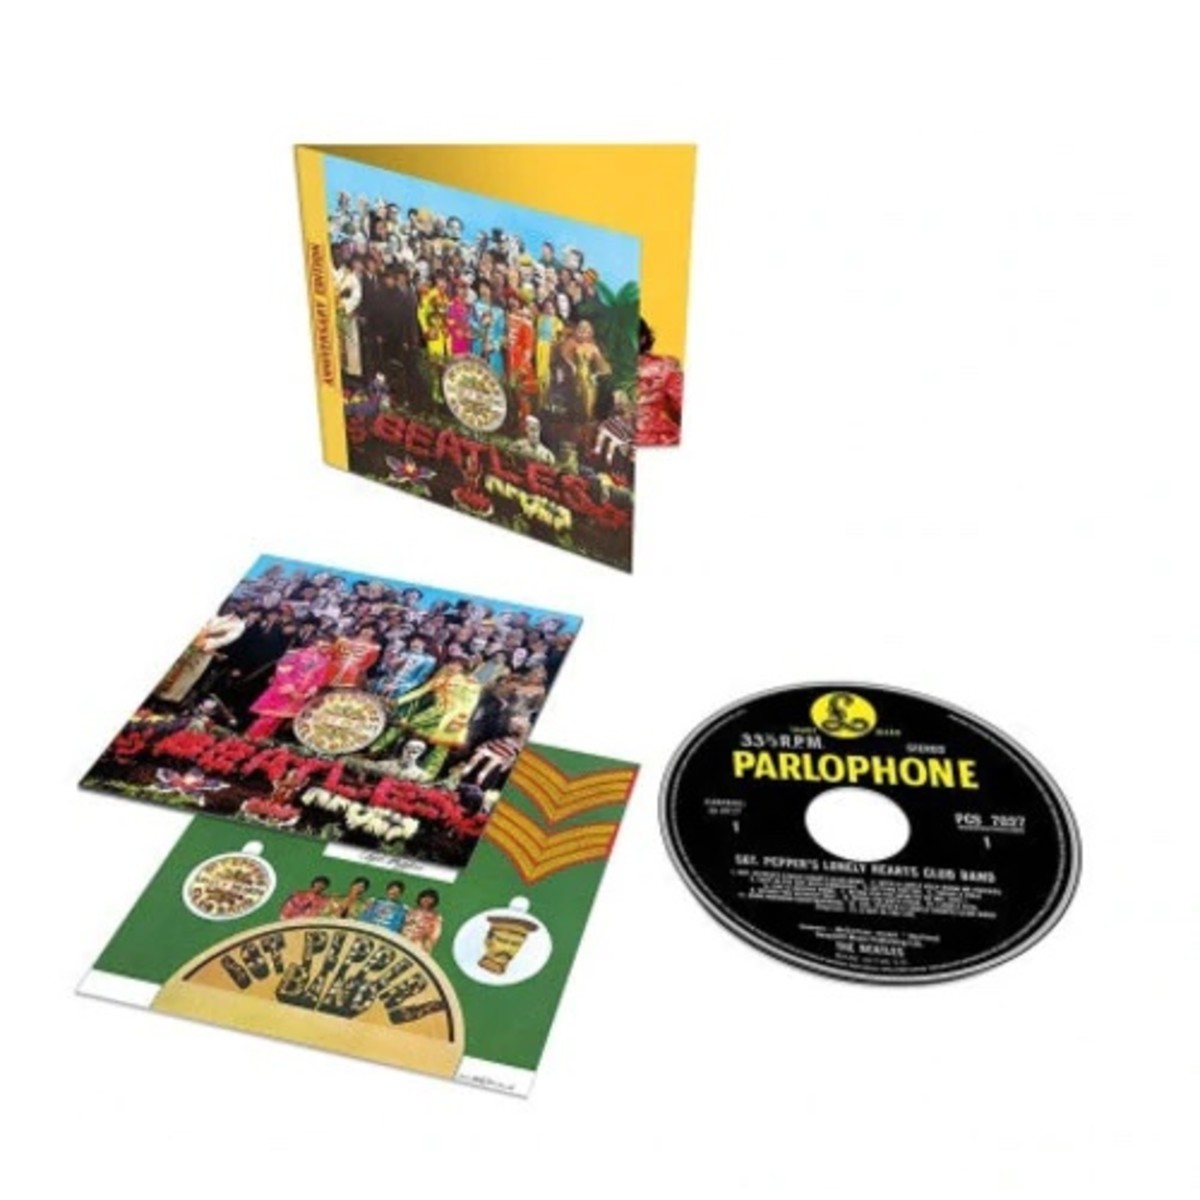 The 2017 CD release of the 50th Anniversary Edition of Sgt. Pepper, remixed and remastered.